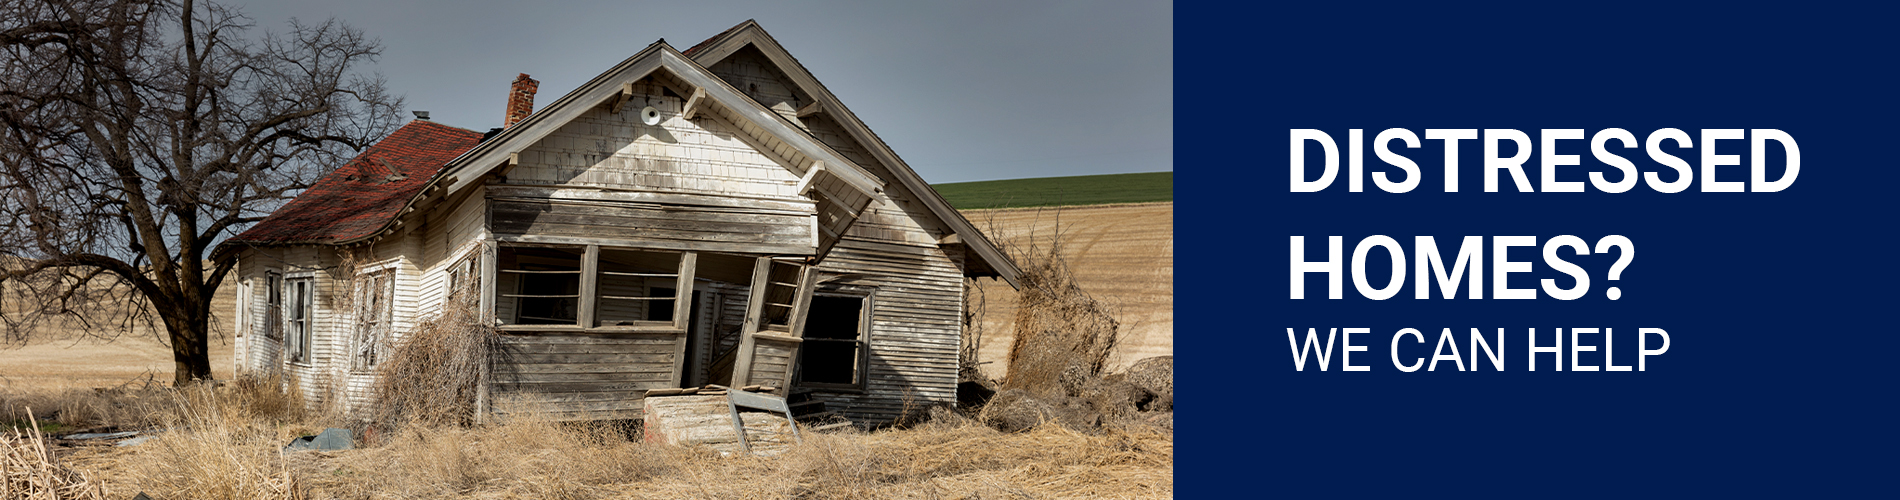 abandoned house, Distressed Homes? We can help